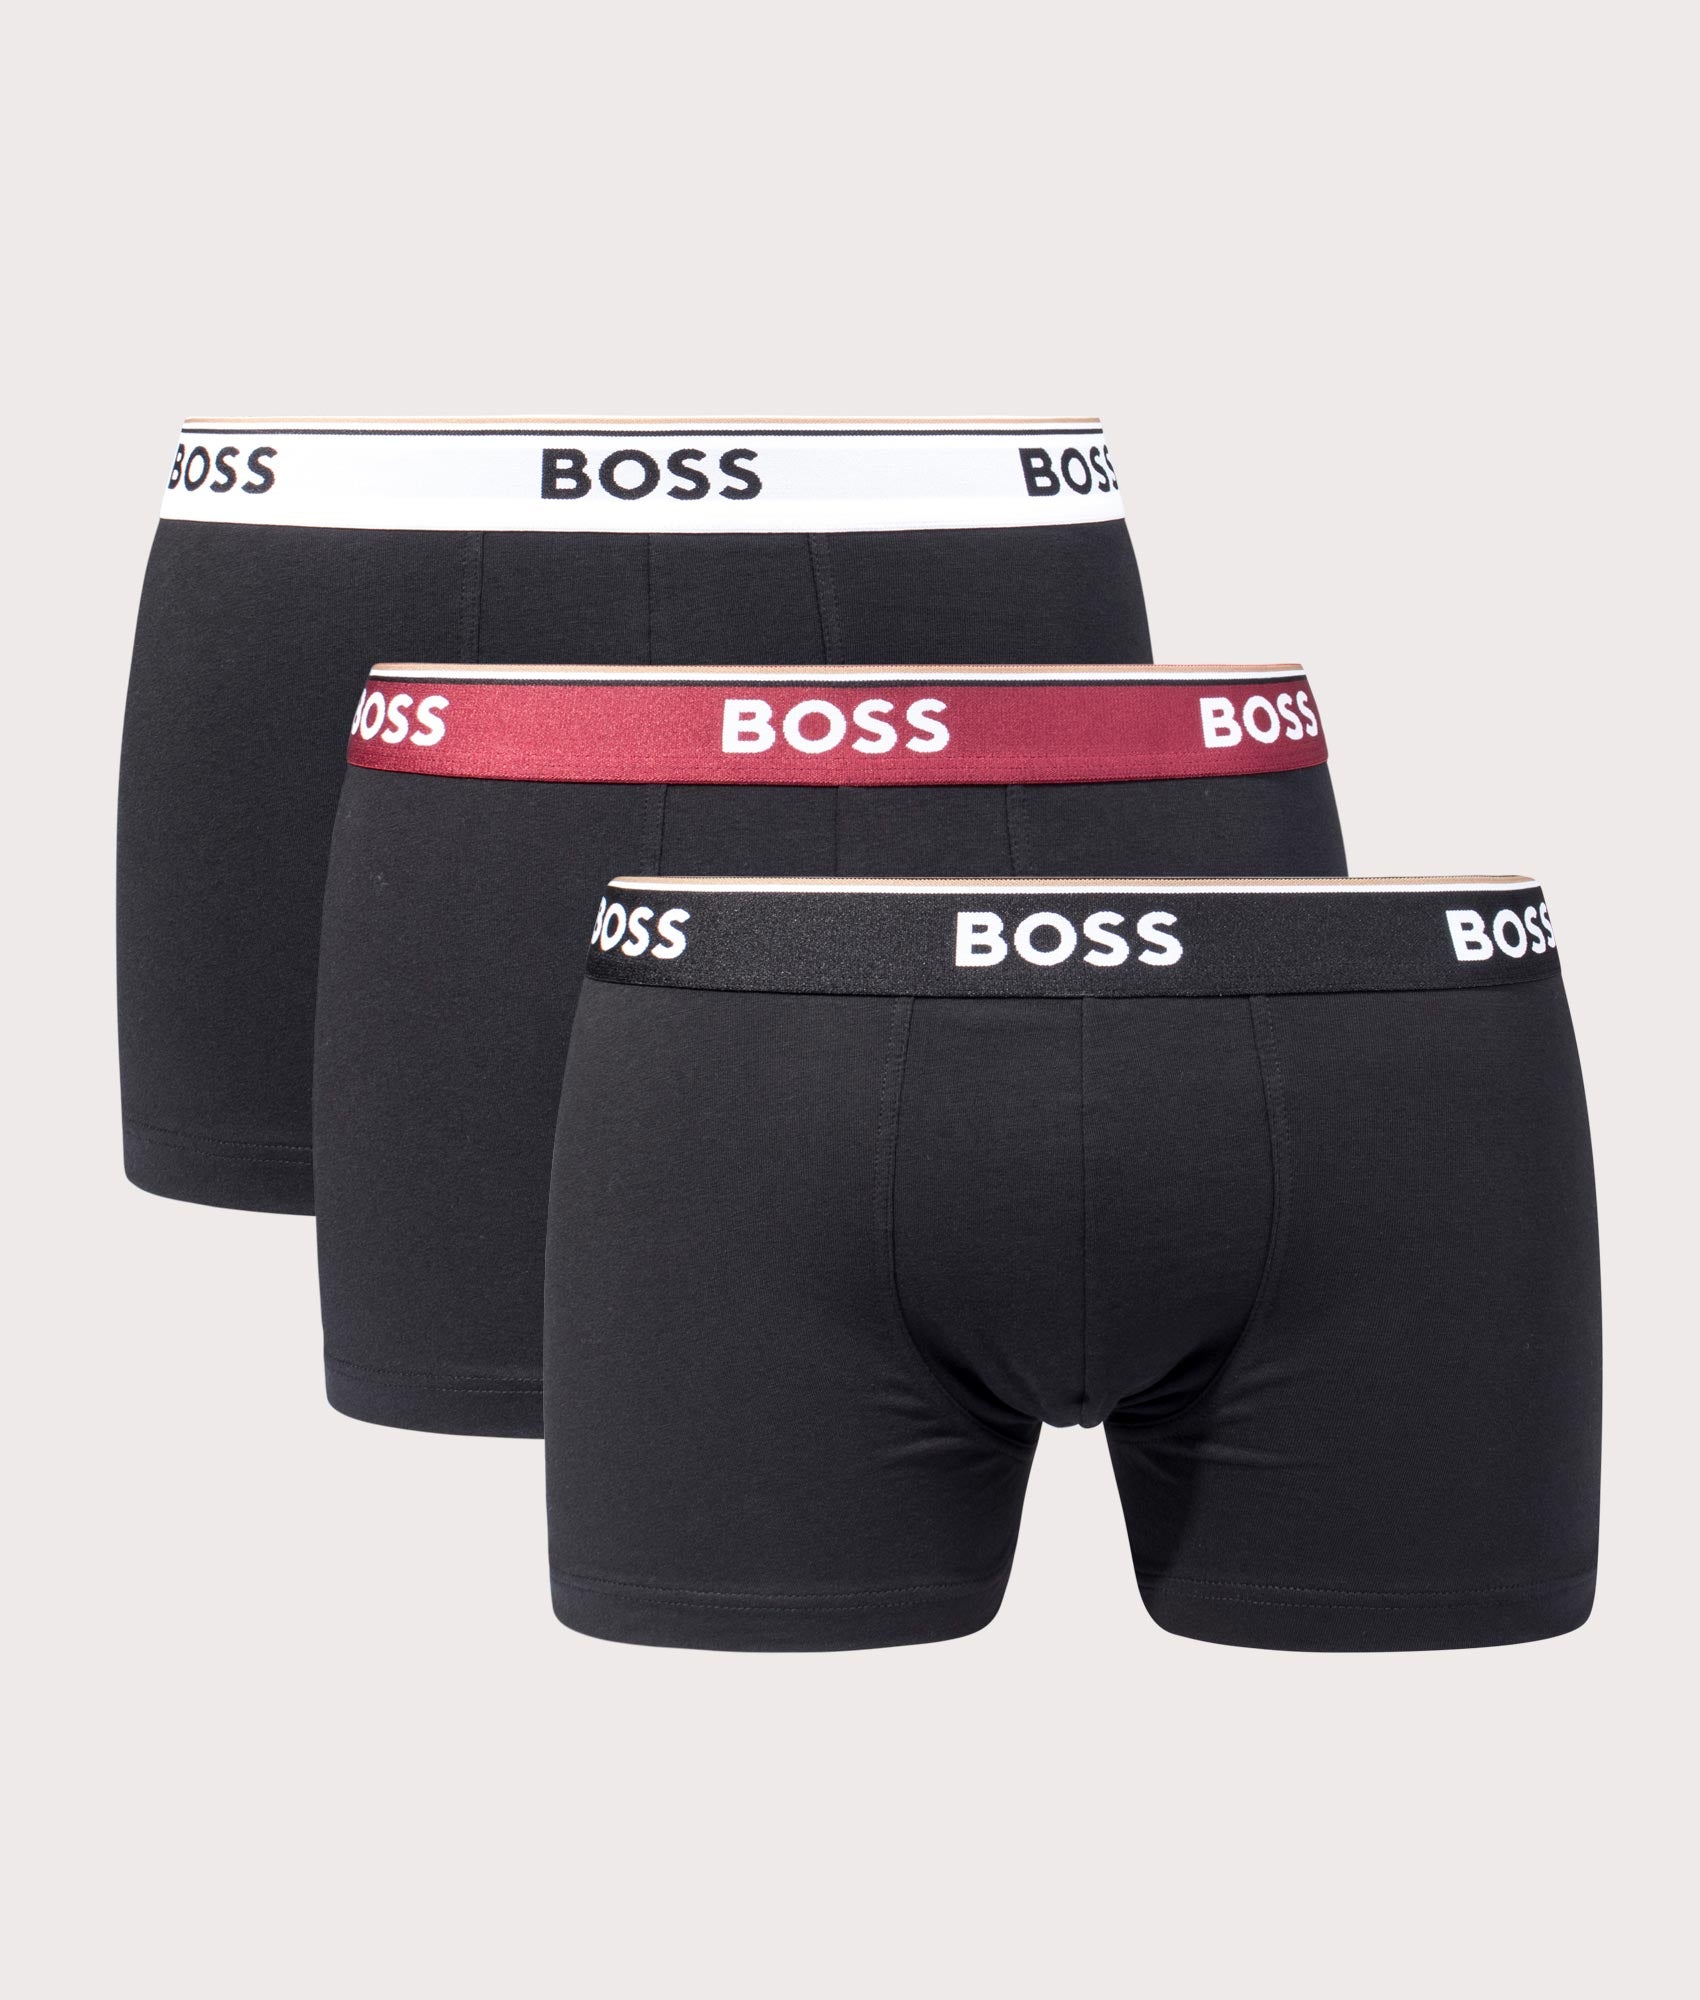 BOSS Mens 3 Pack of Stretch-Cotton Trunks - Colour: 973 Open Miscellaneous - Size: Large